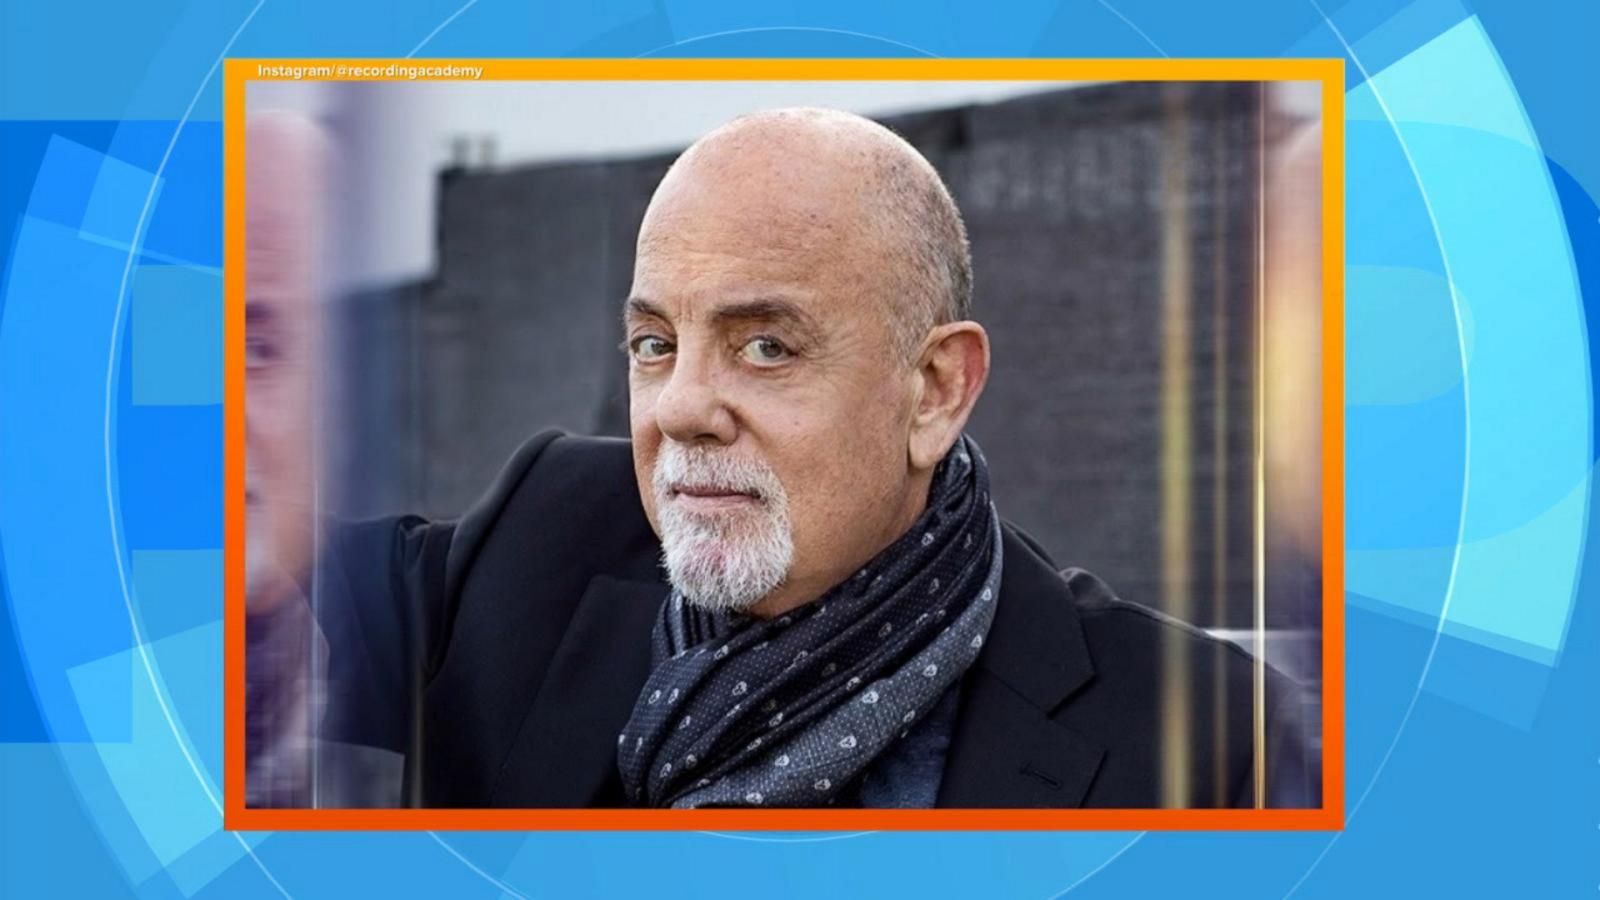 Billy Joel to debut new song at Grammys Good Morning America